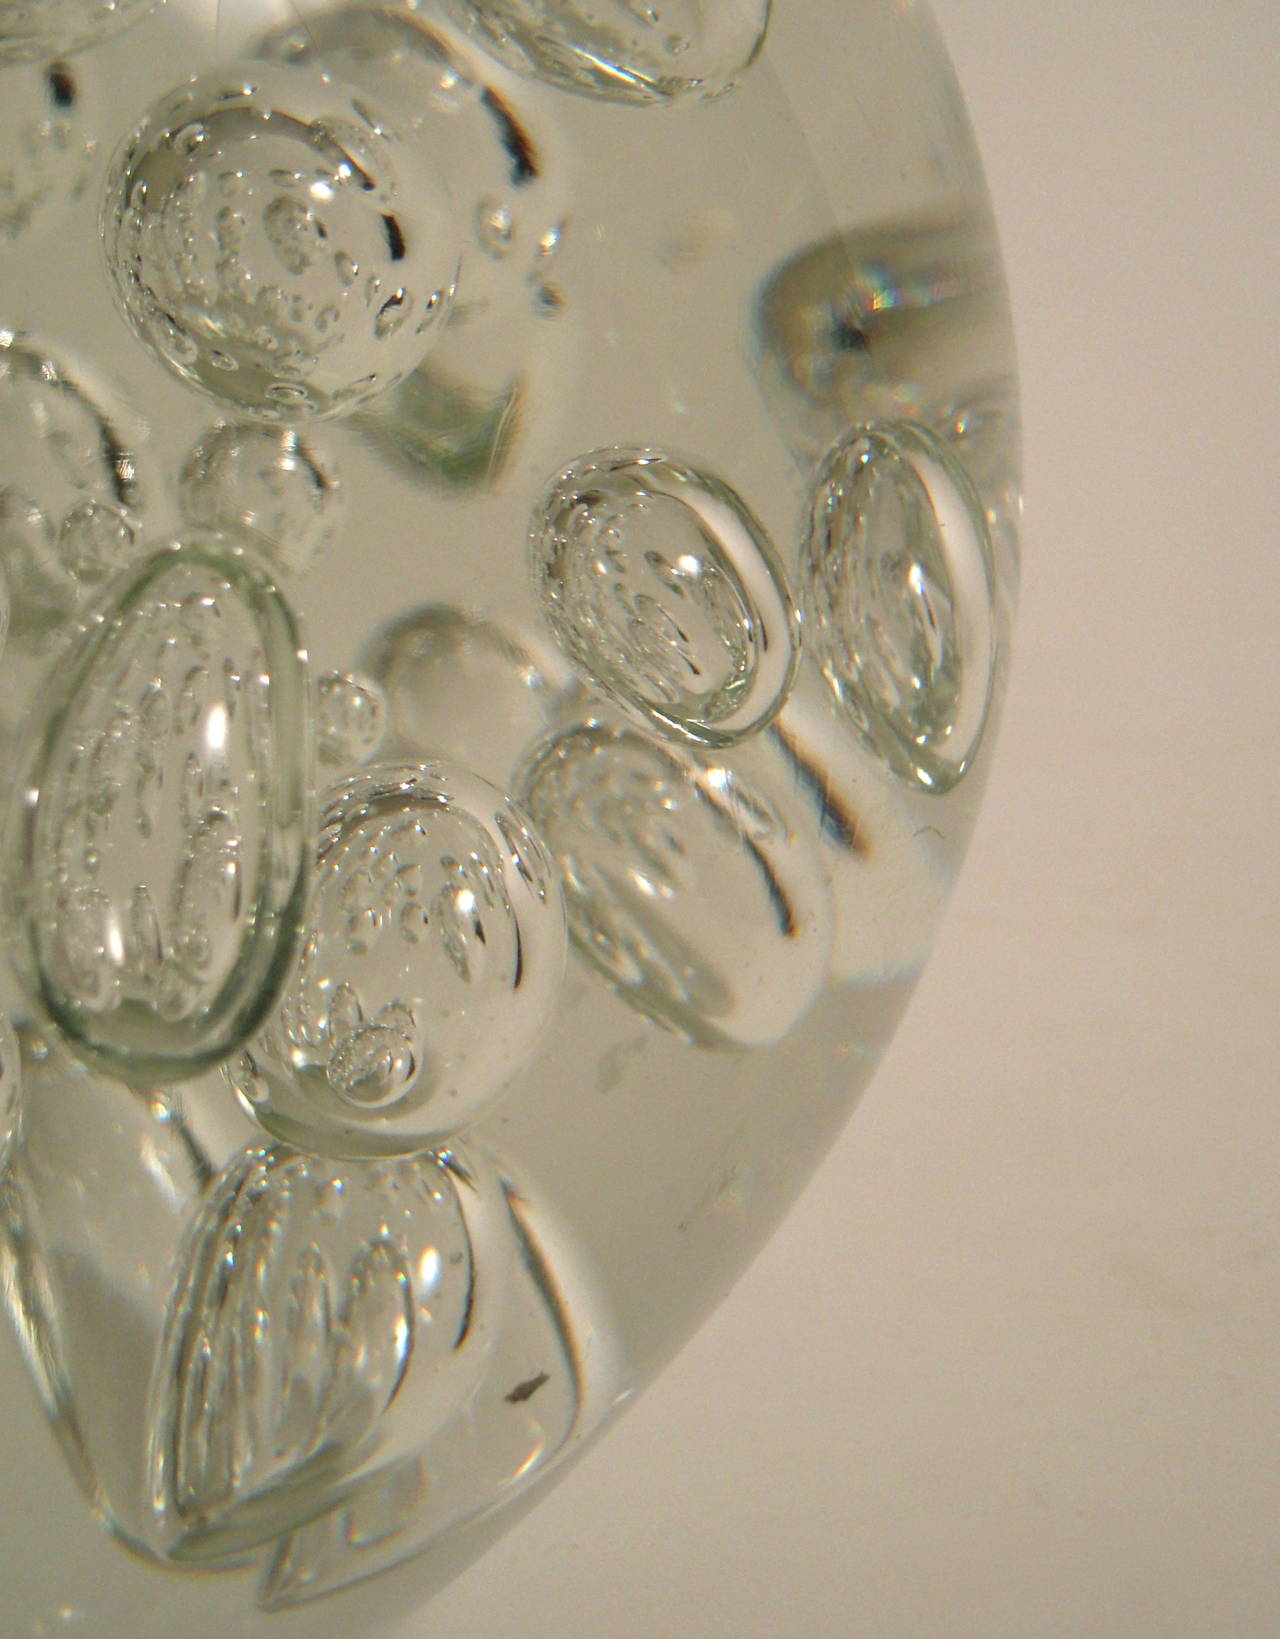 A large circular colorless glass  paperweight, with large air bubbles inside, on a flat base, possibly Murano, Italy. Fabulous, sculptural decoration. Could be used as a door stop, too.